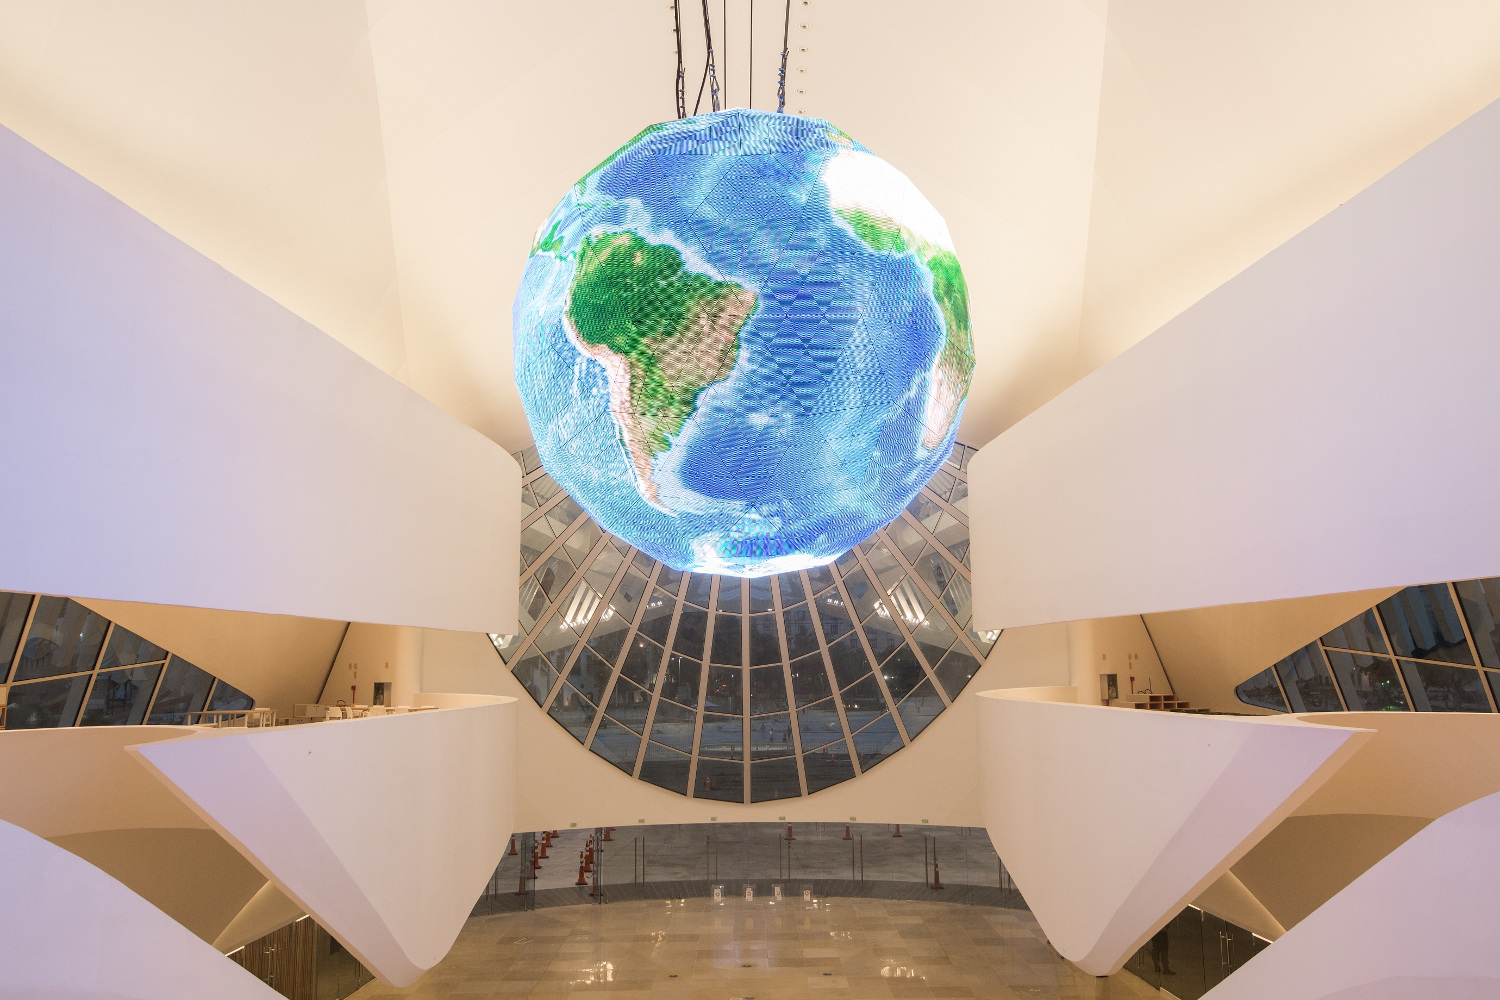  Photo shows a very modern and white building from inside. A big, illuminated globe is hanging from the ceiling.